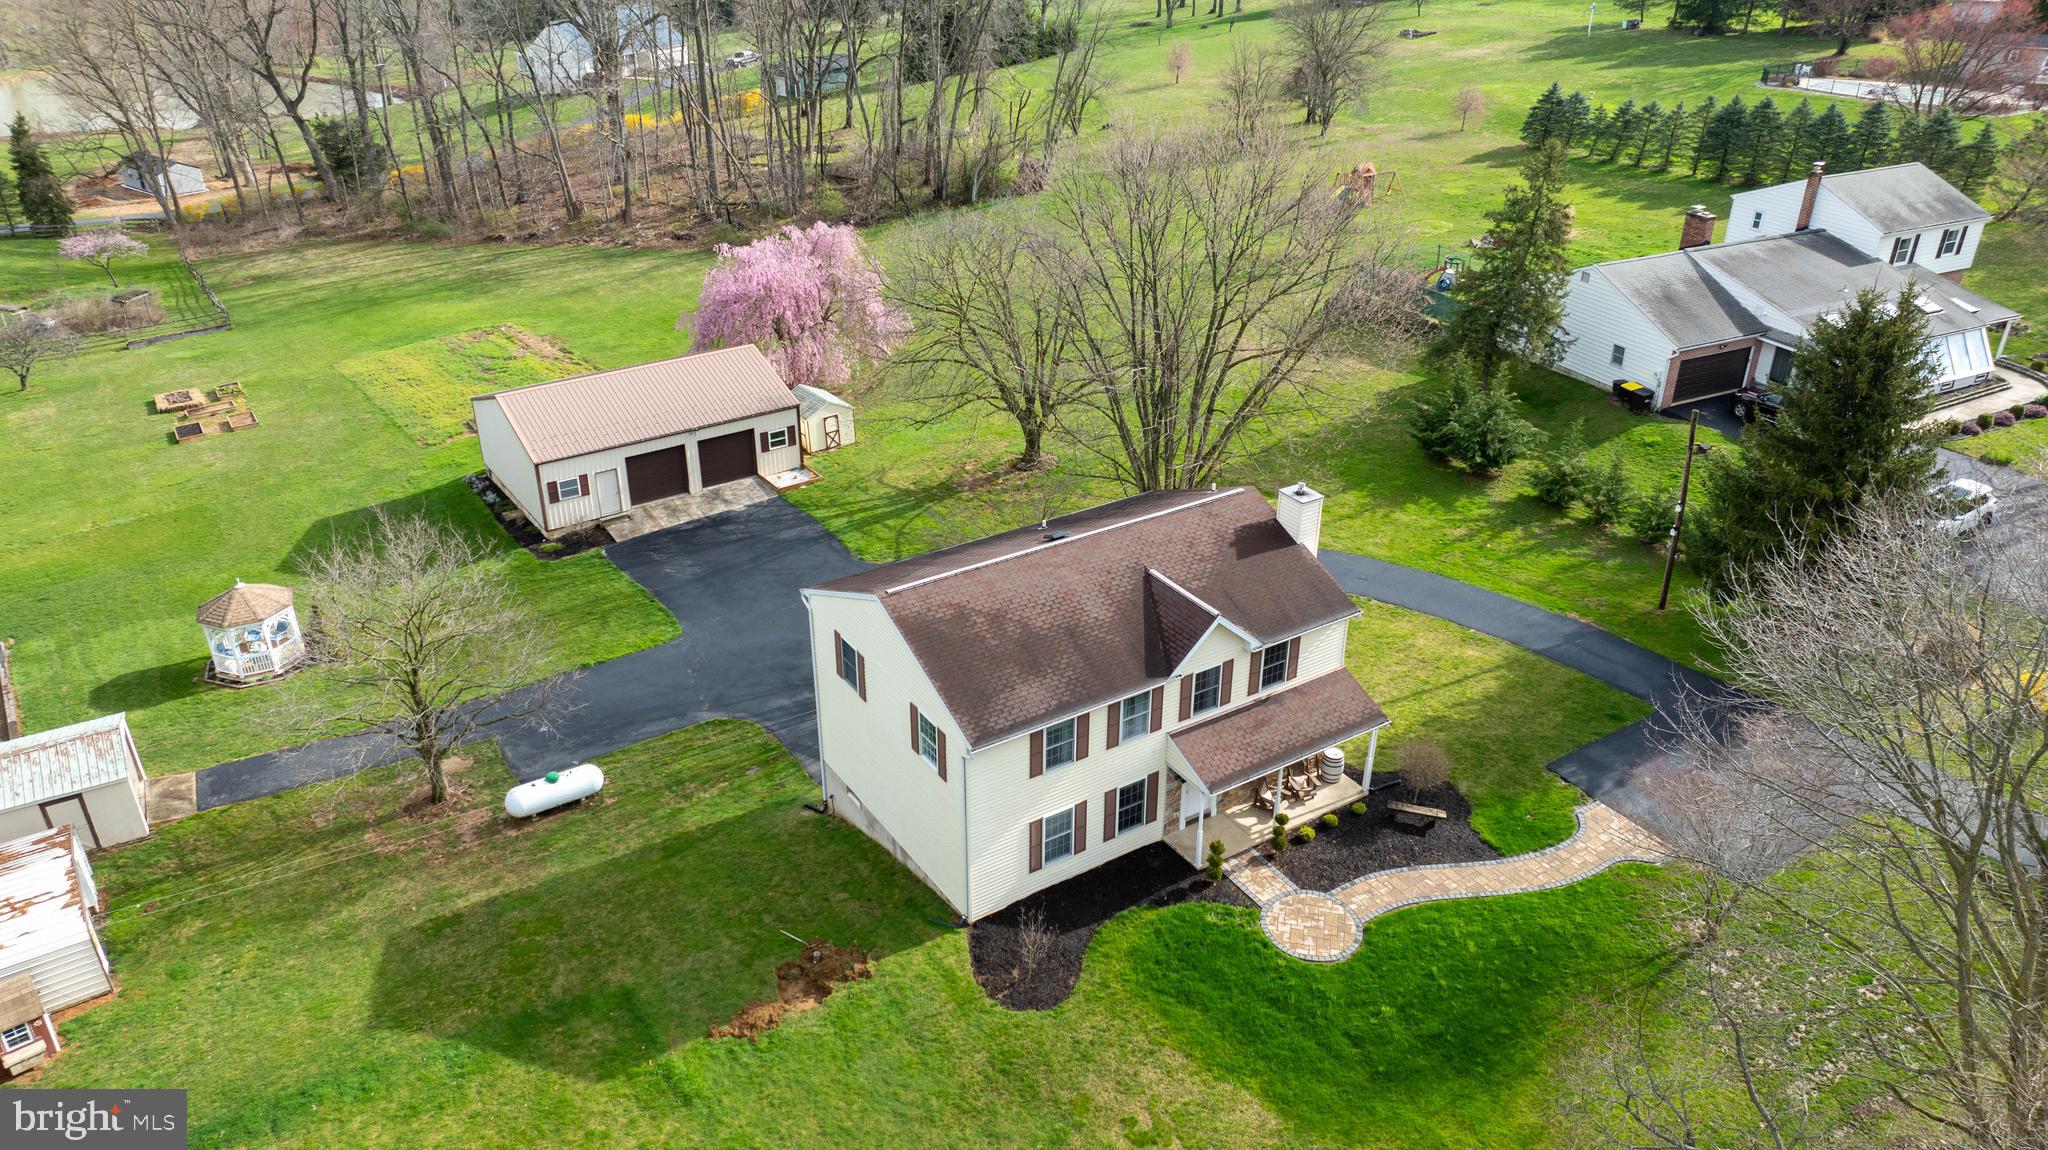 an aerial view of a house with yard basket ball court and outdoor seating